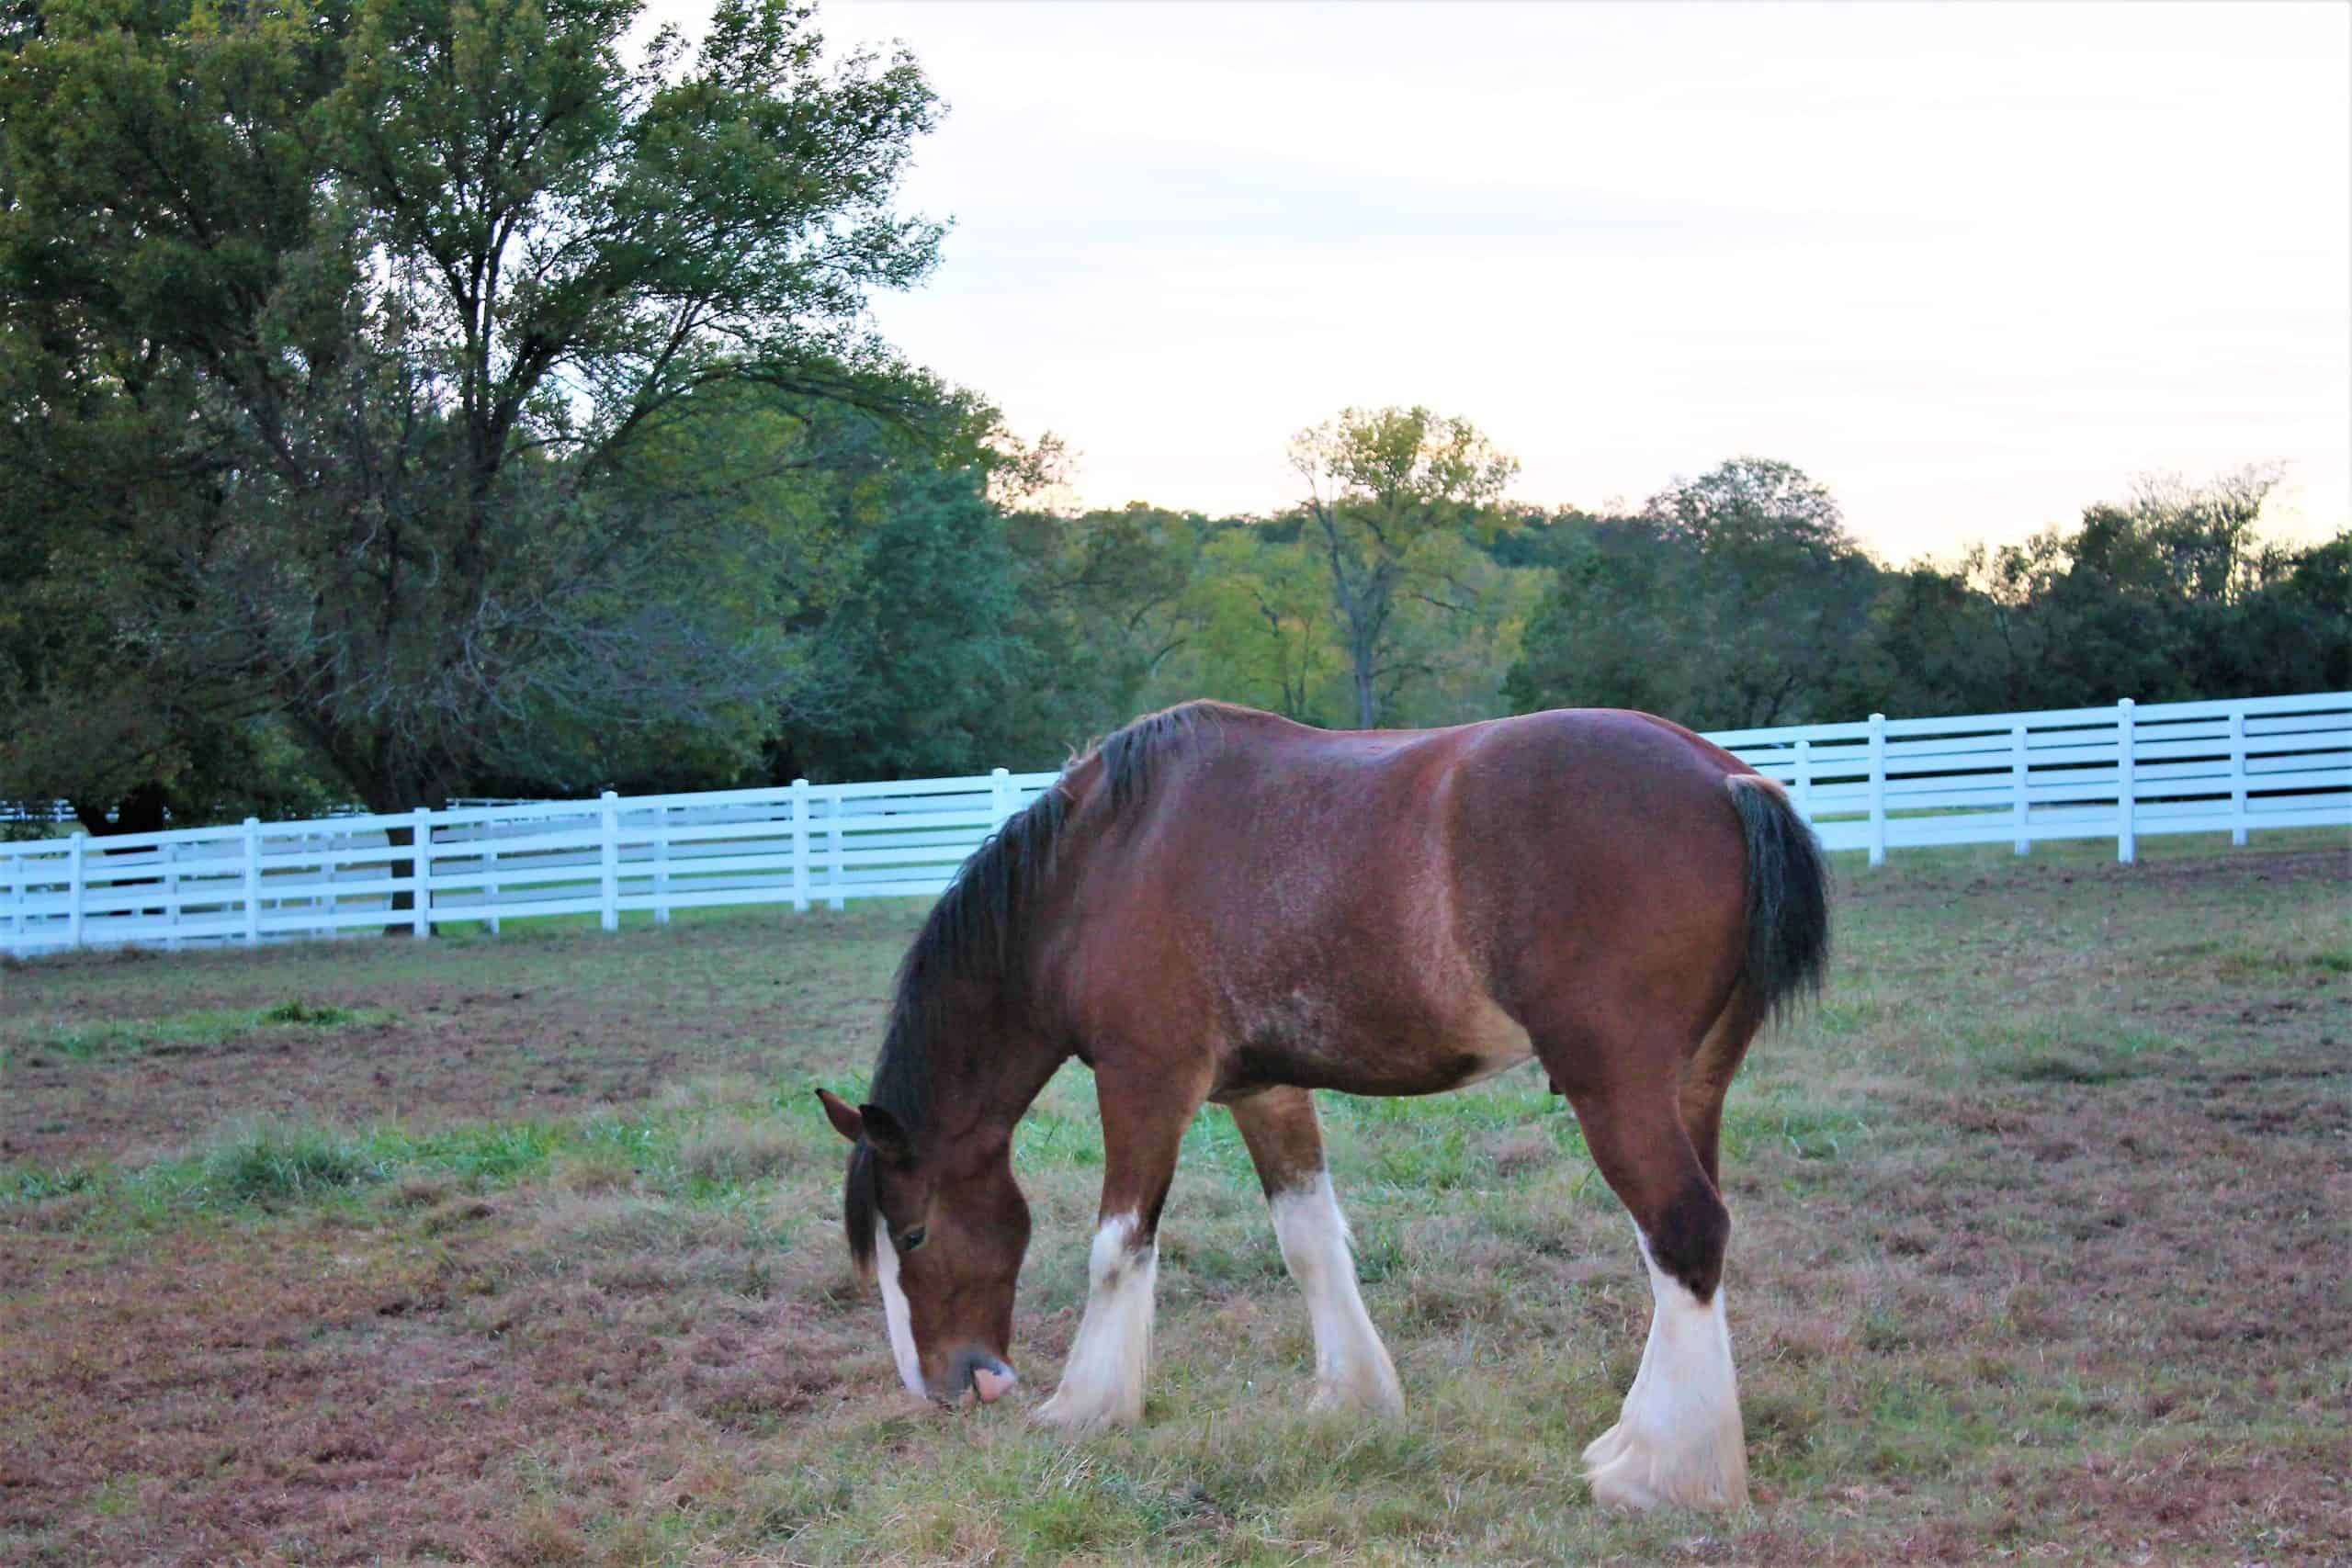 Images of Clydesdale horses in a paddock